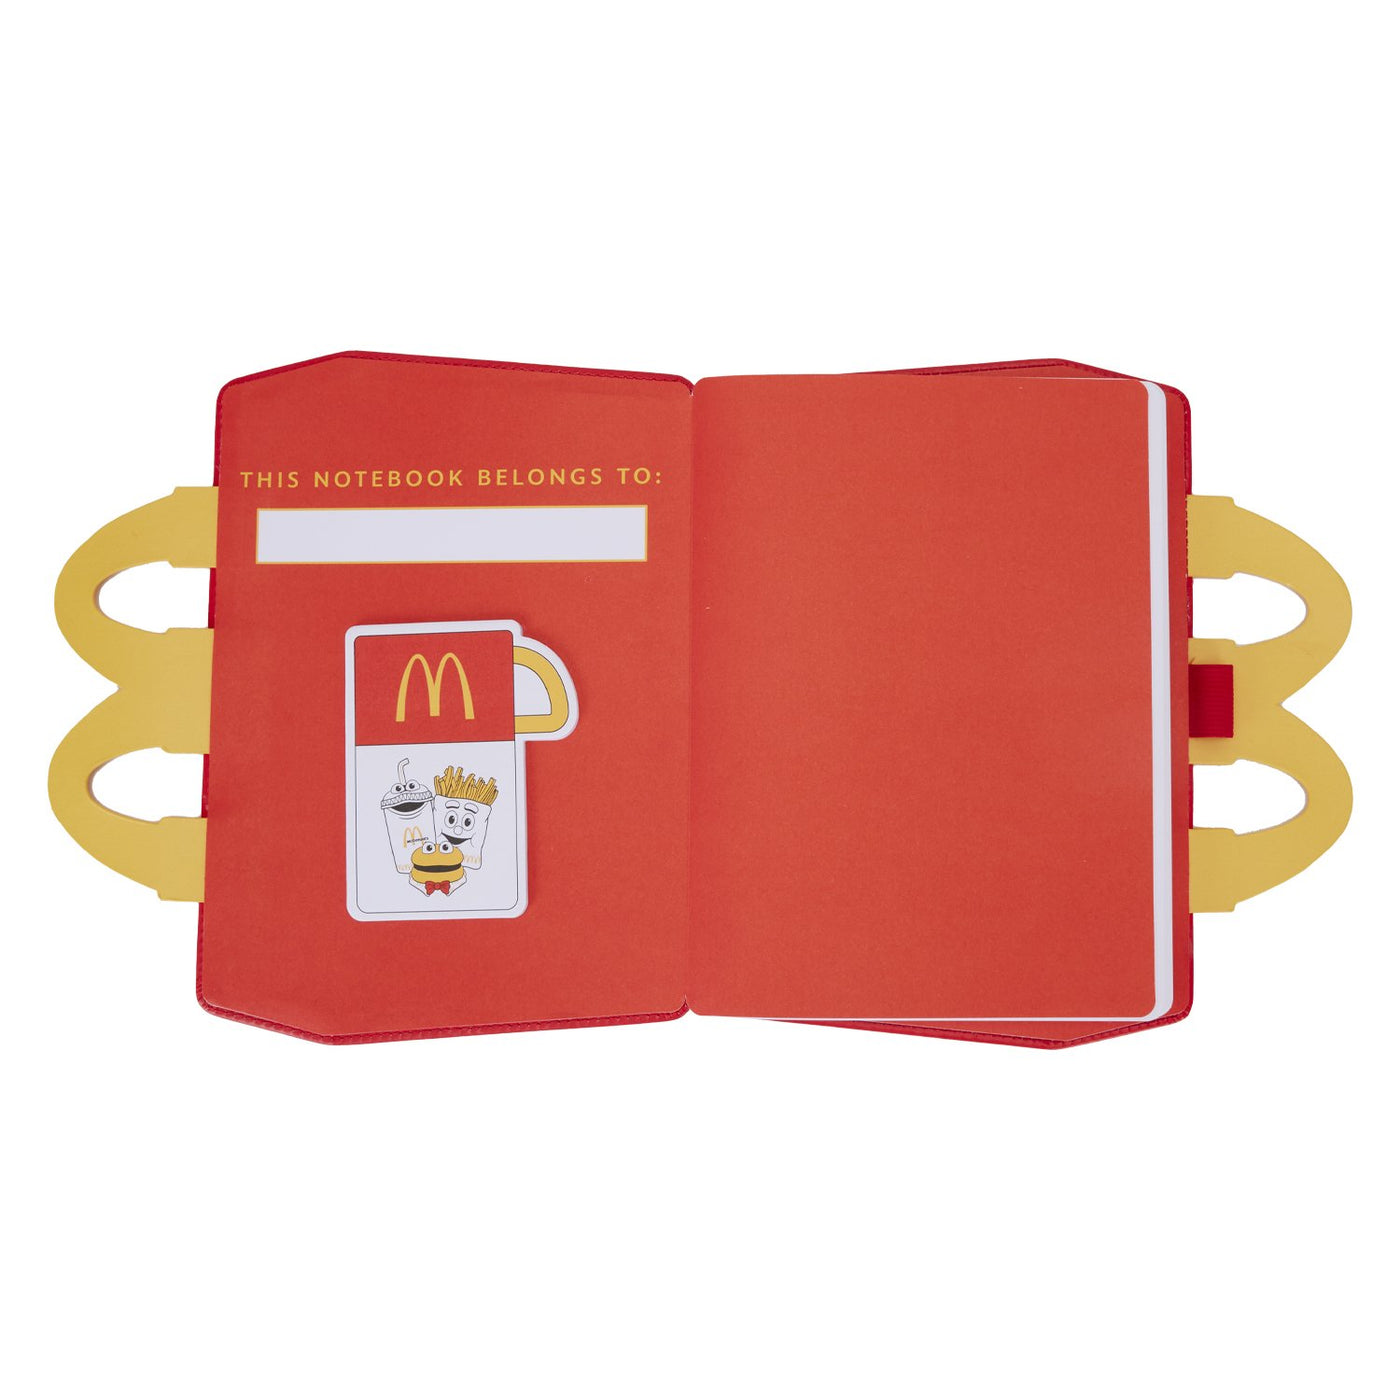 Loungefly McDonald's Happy Meal Lunchbox Notebook - Interior Post It Notes